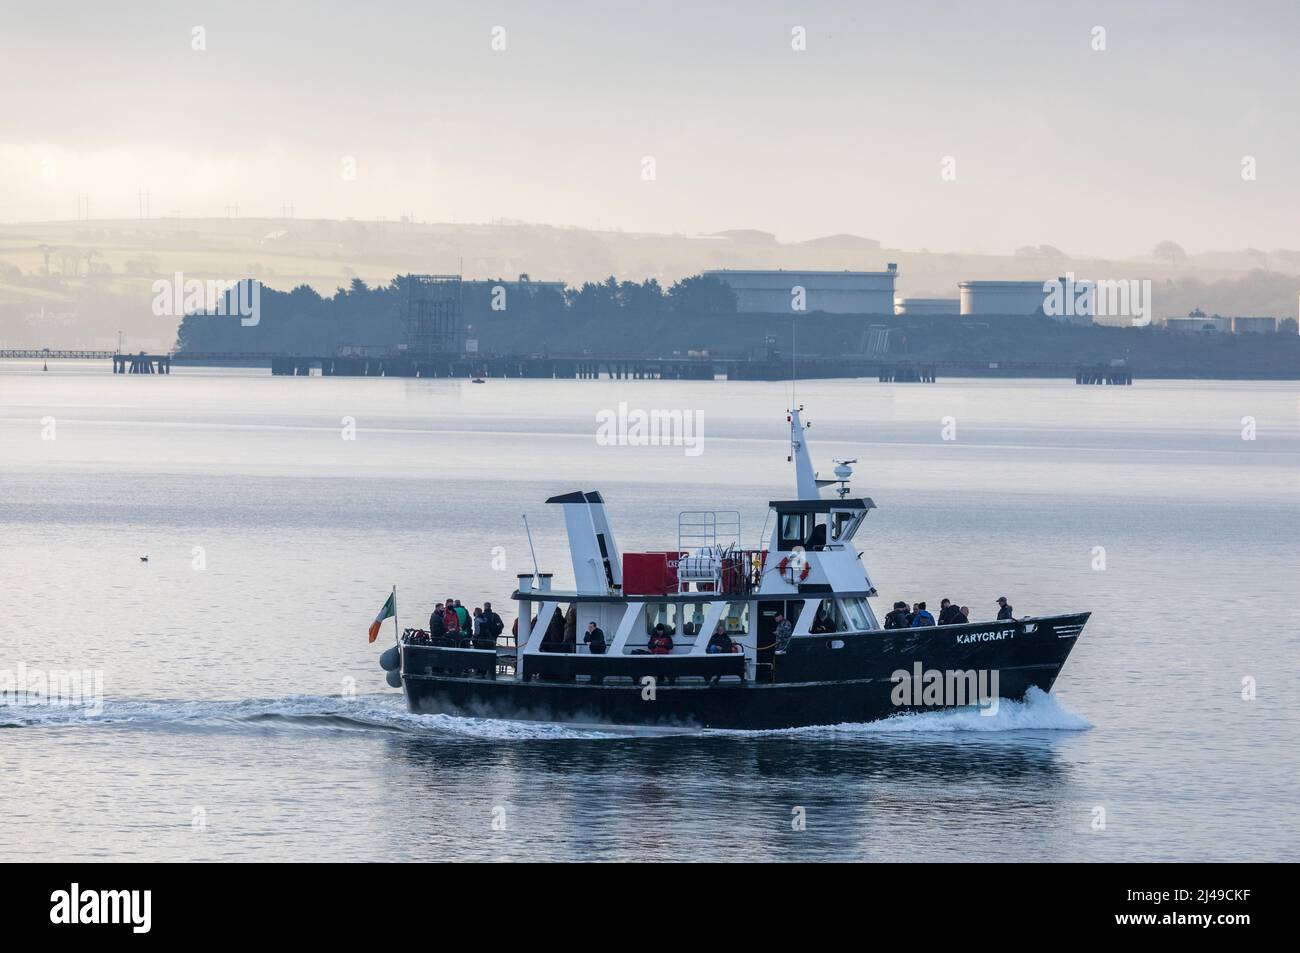 Cobh, Cork, Ireland. 13th April, 2022. Ferry boat Karycraft passes the storage tanks at the oil refinery carrying Naval Service personnel to their base in Haulbowline from Cobh, Co. Cork, Ireland. - Credit; David Creedon / Alamy Live News Stock Photo